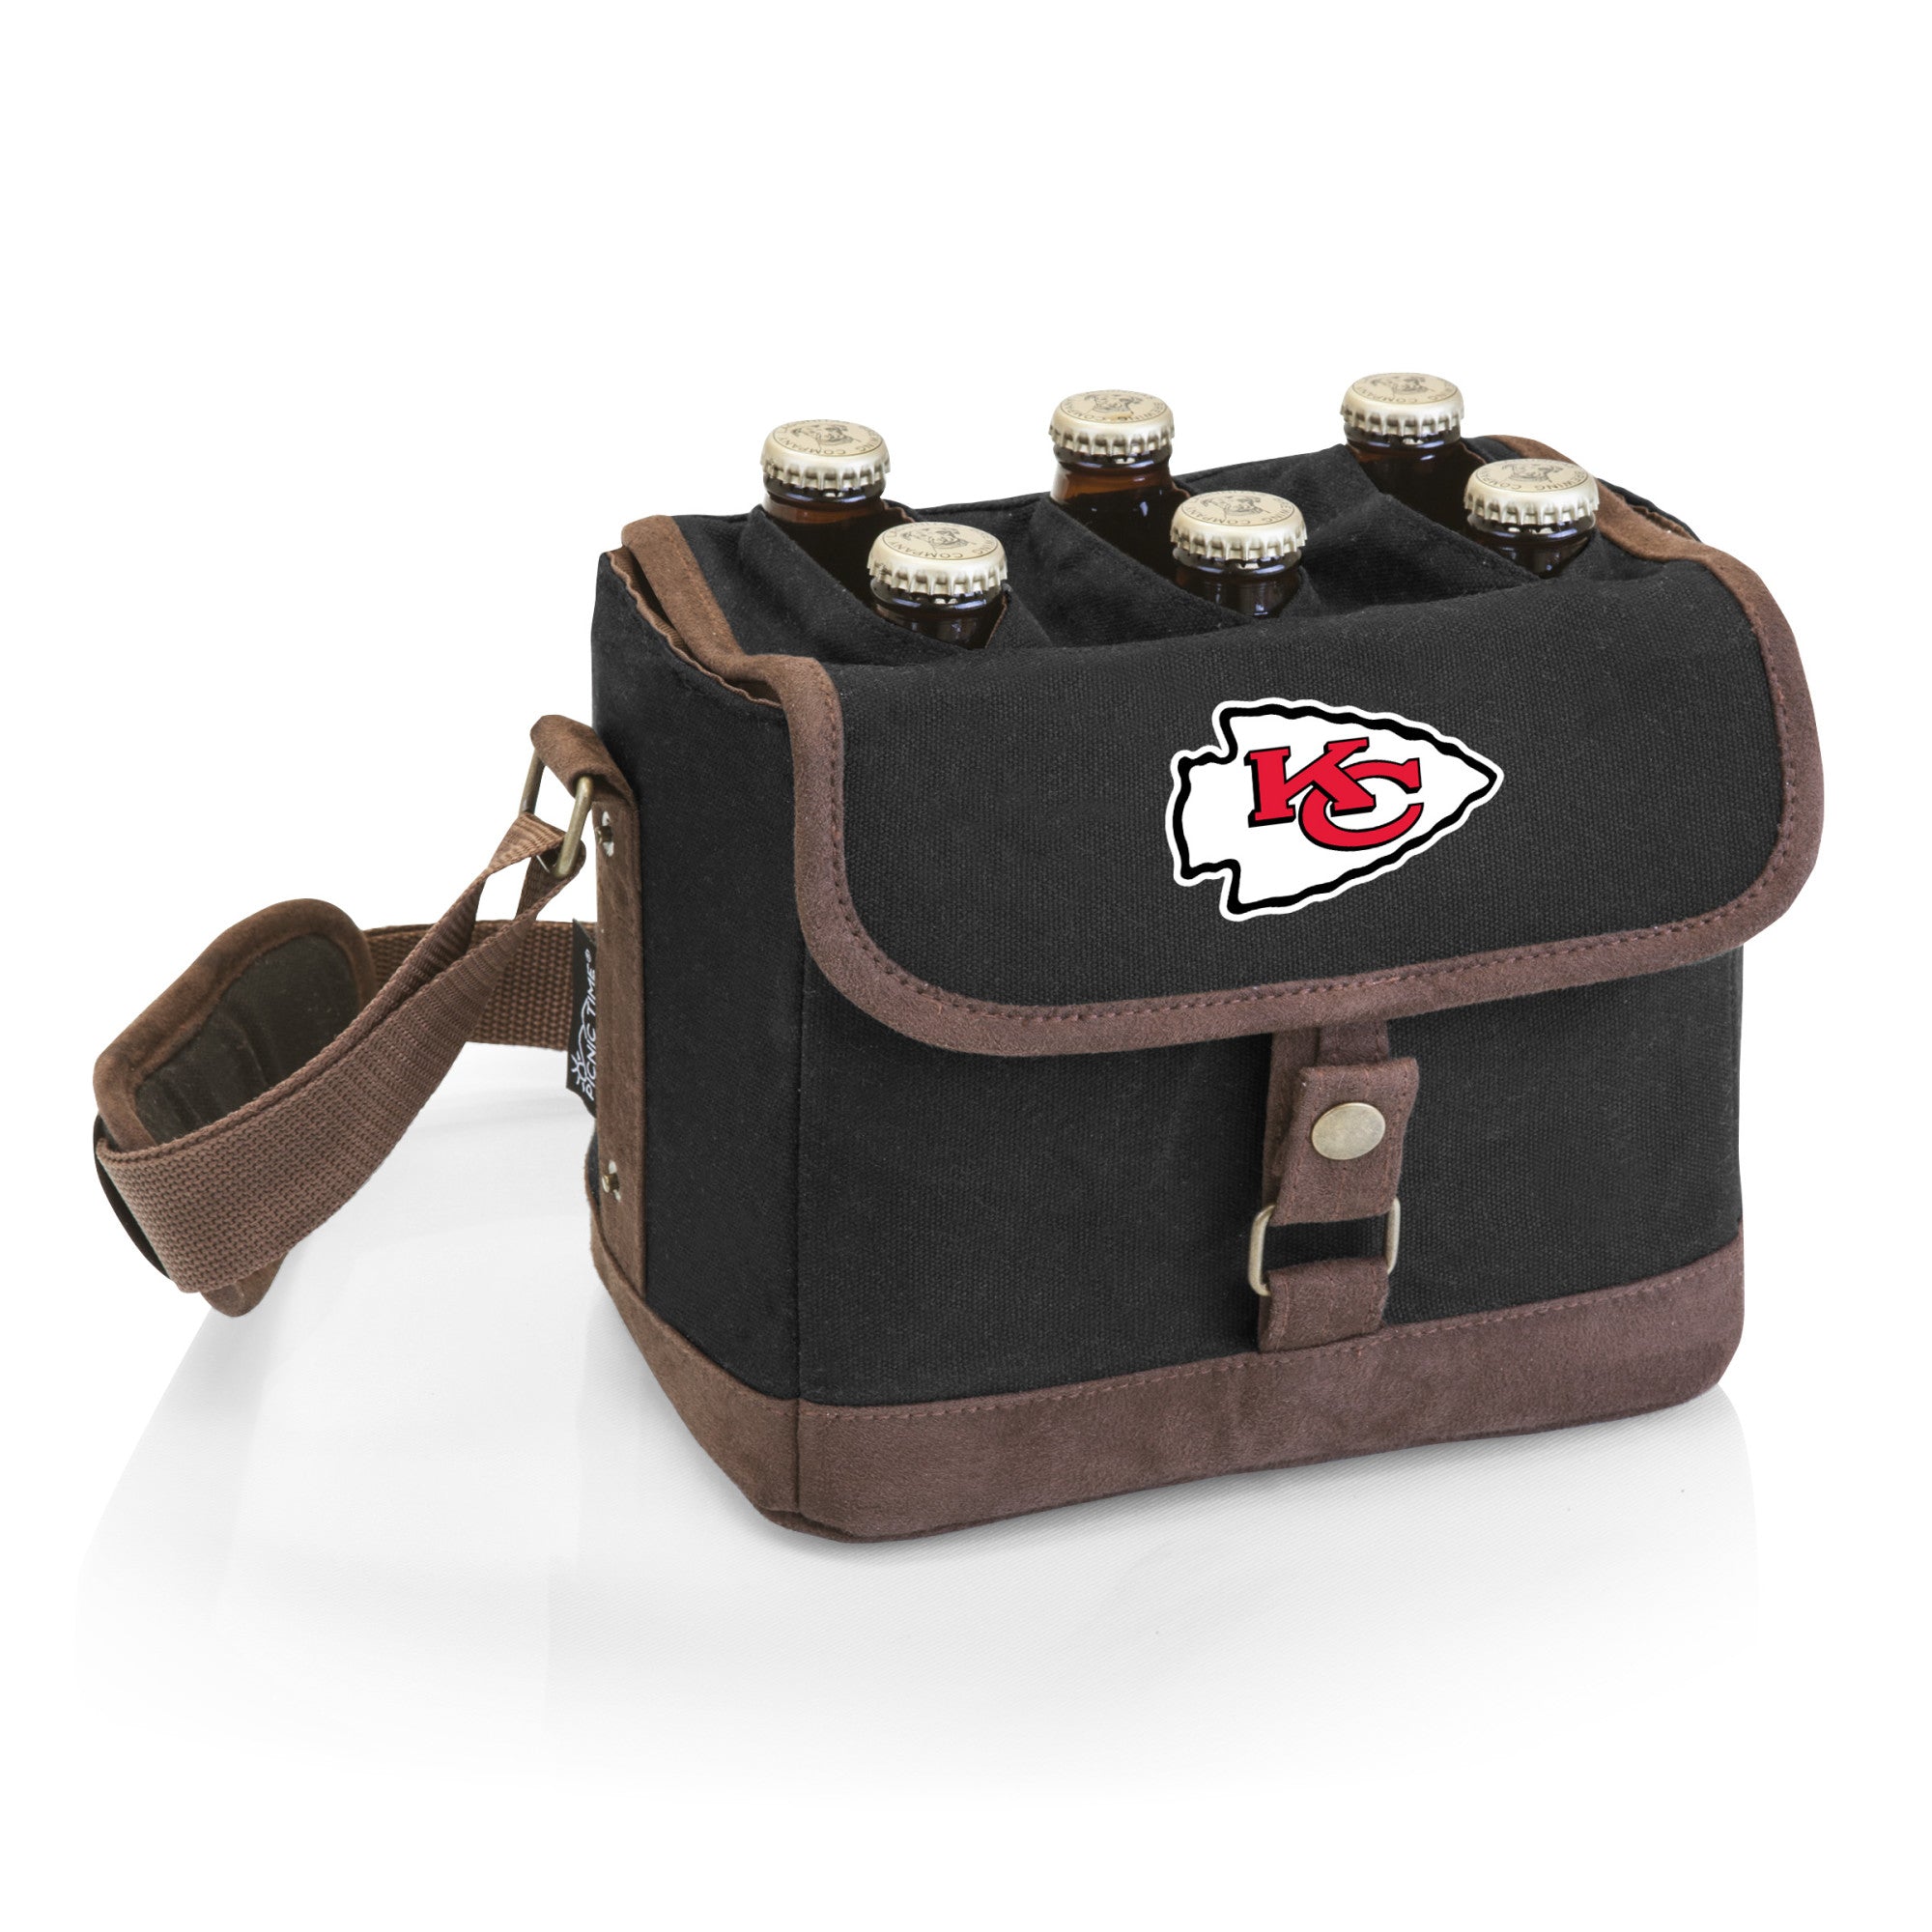 Kansas City Chiefs - Beer Caddy Cooler Tote with Opener, (Black with Brown Accents)